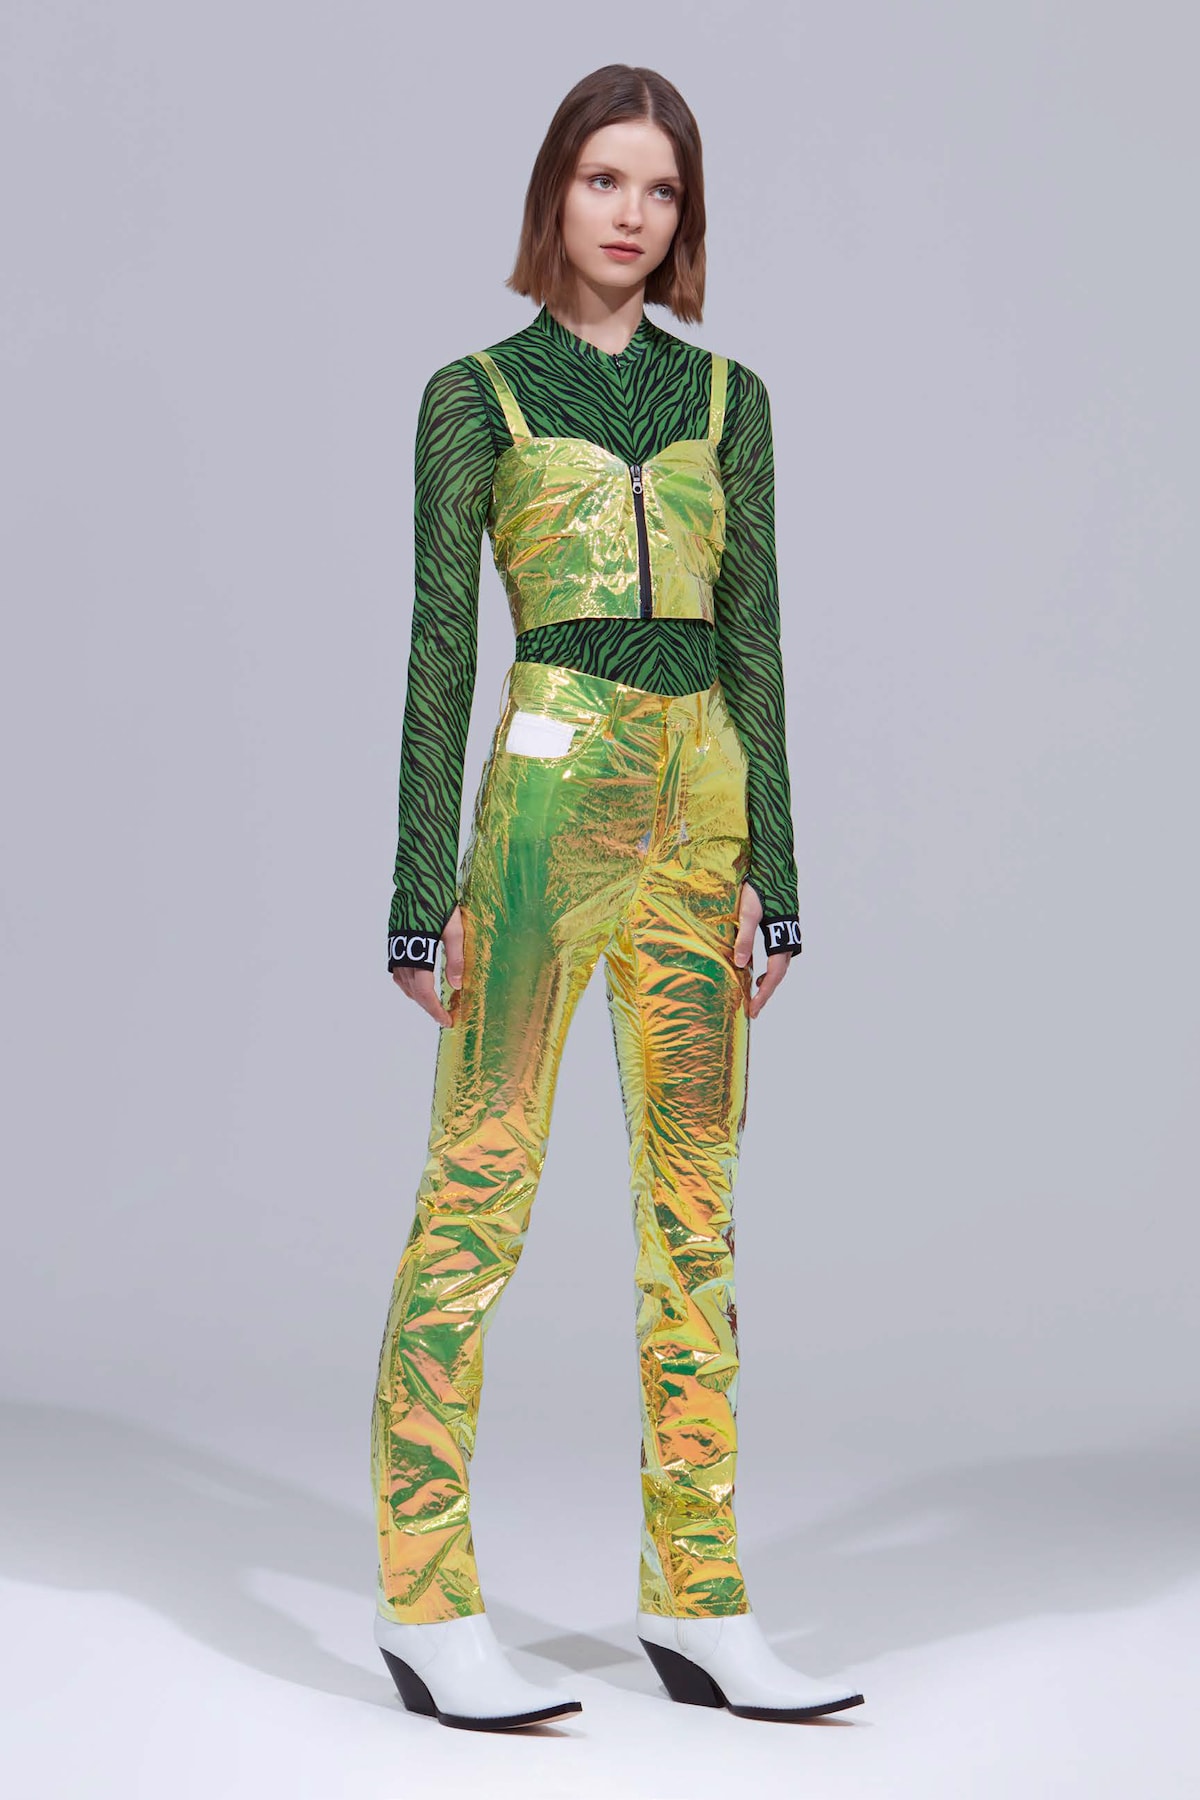 Fiorucci Pre-Spring 2019 Lookbook Collection Materials Texture Transparent Shimmer